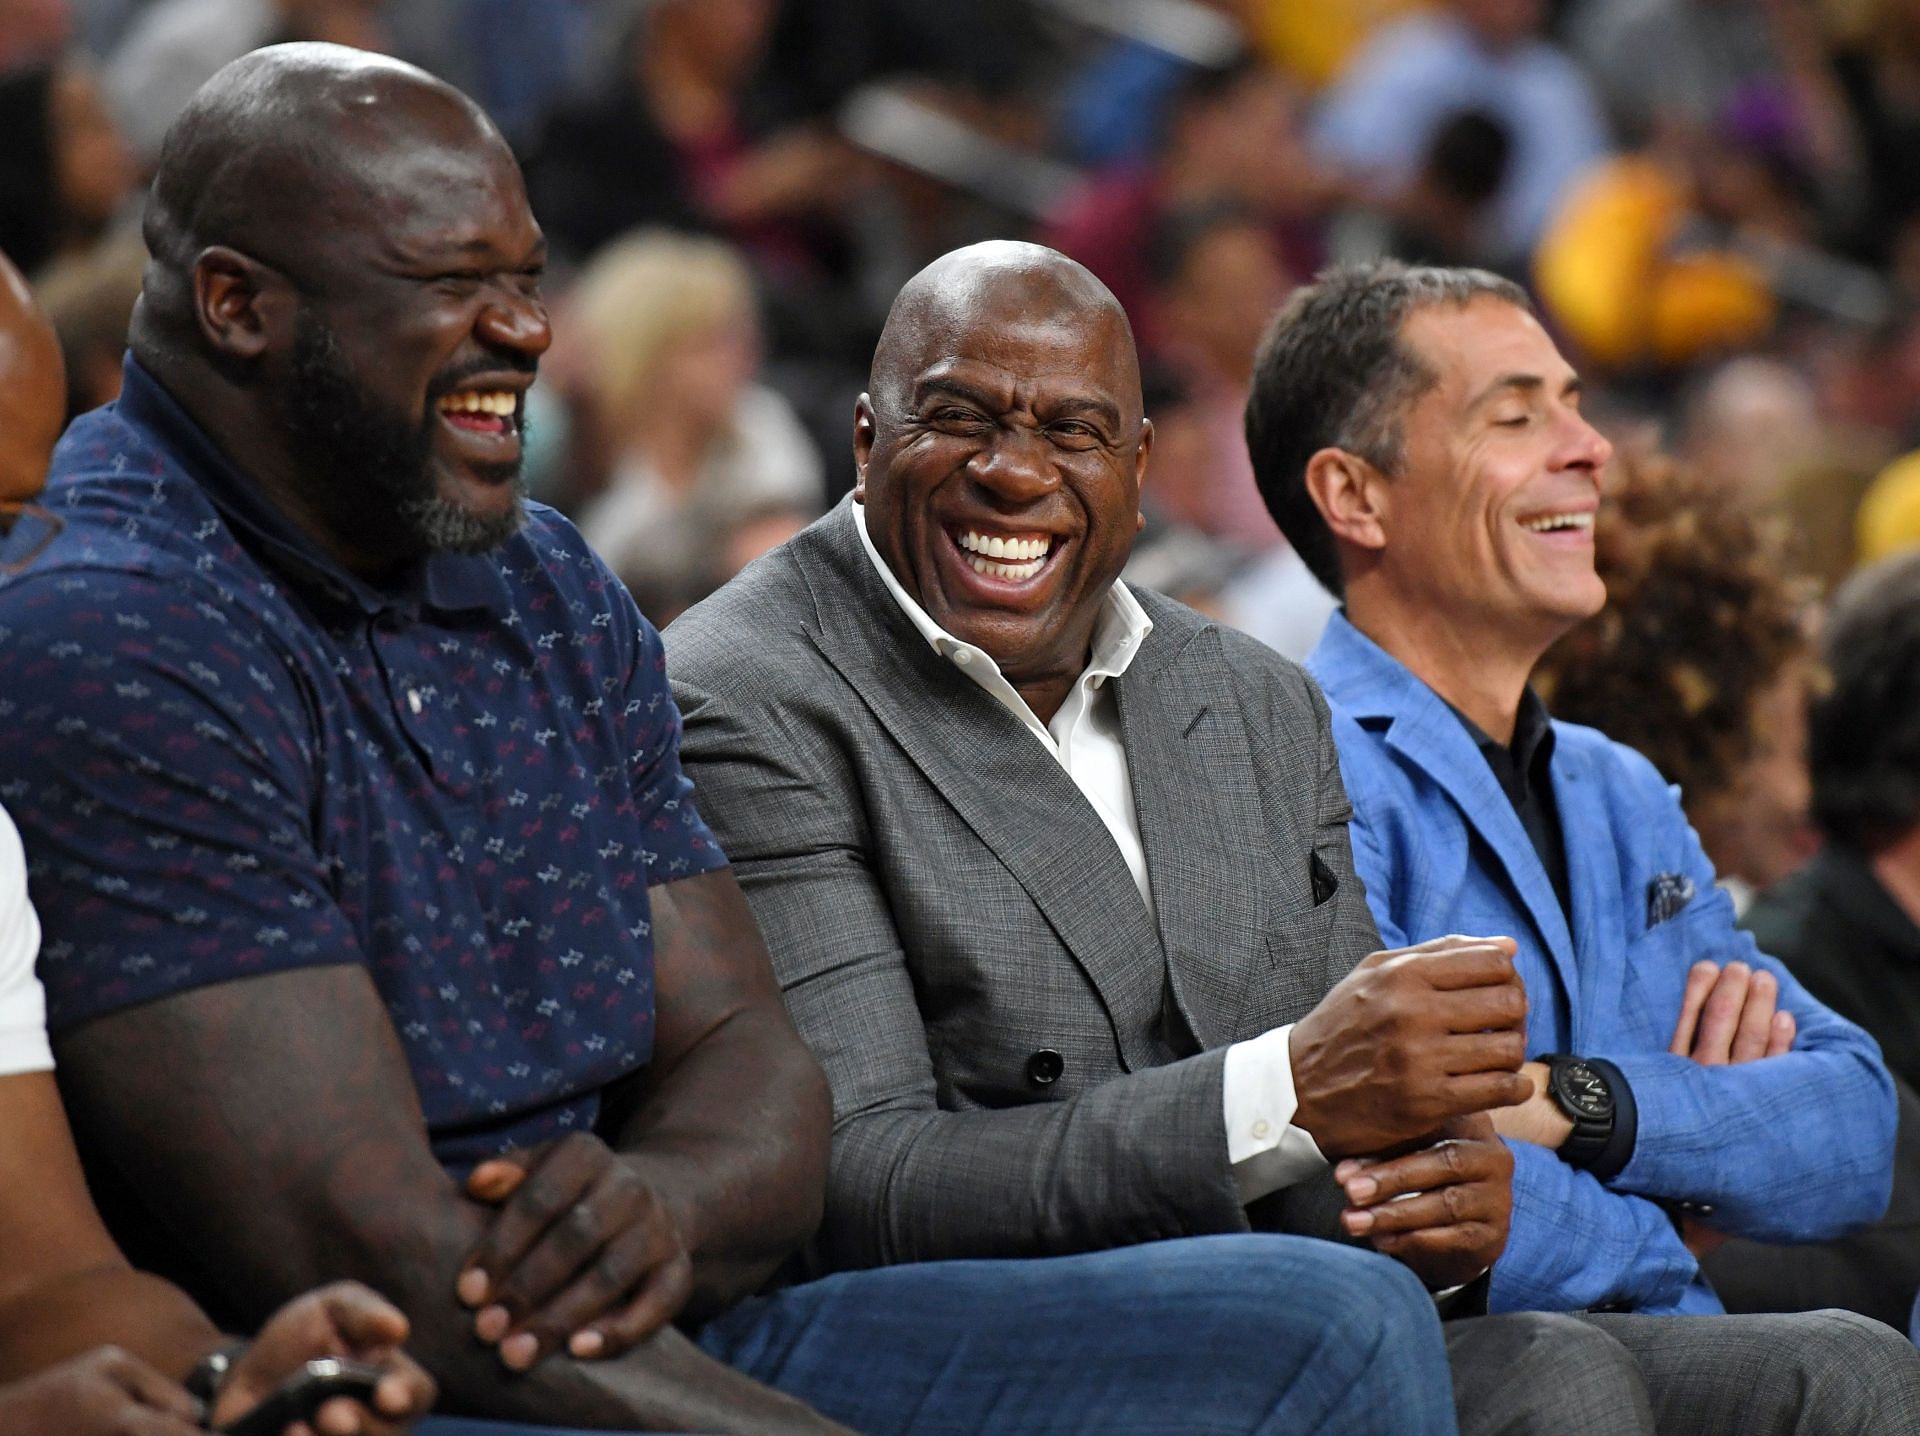 Shaq and Magic are famous LA Lakers that have found success on and off the court.